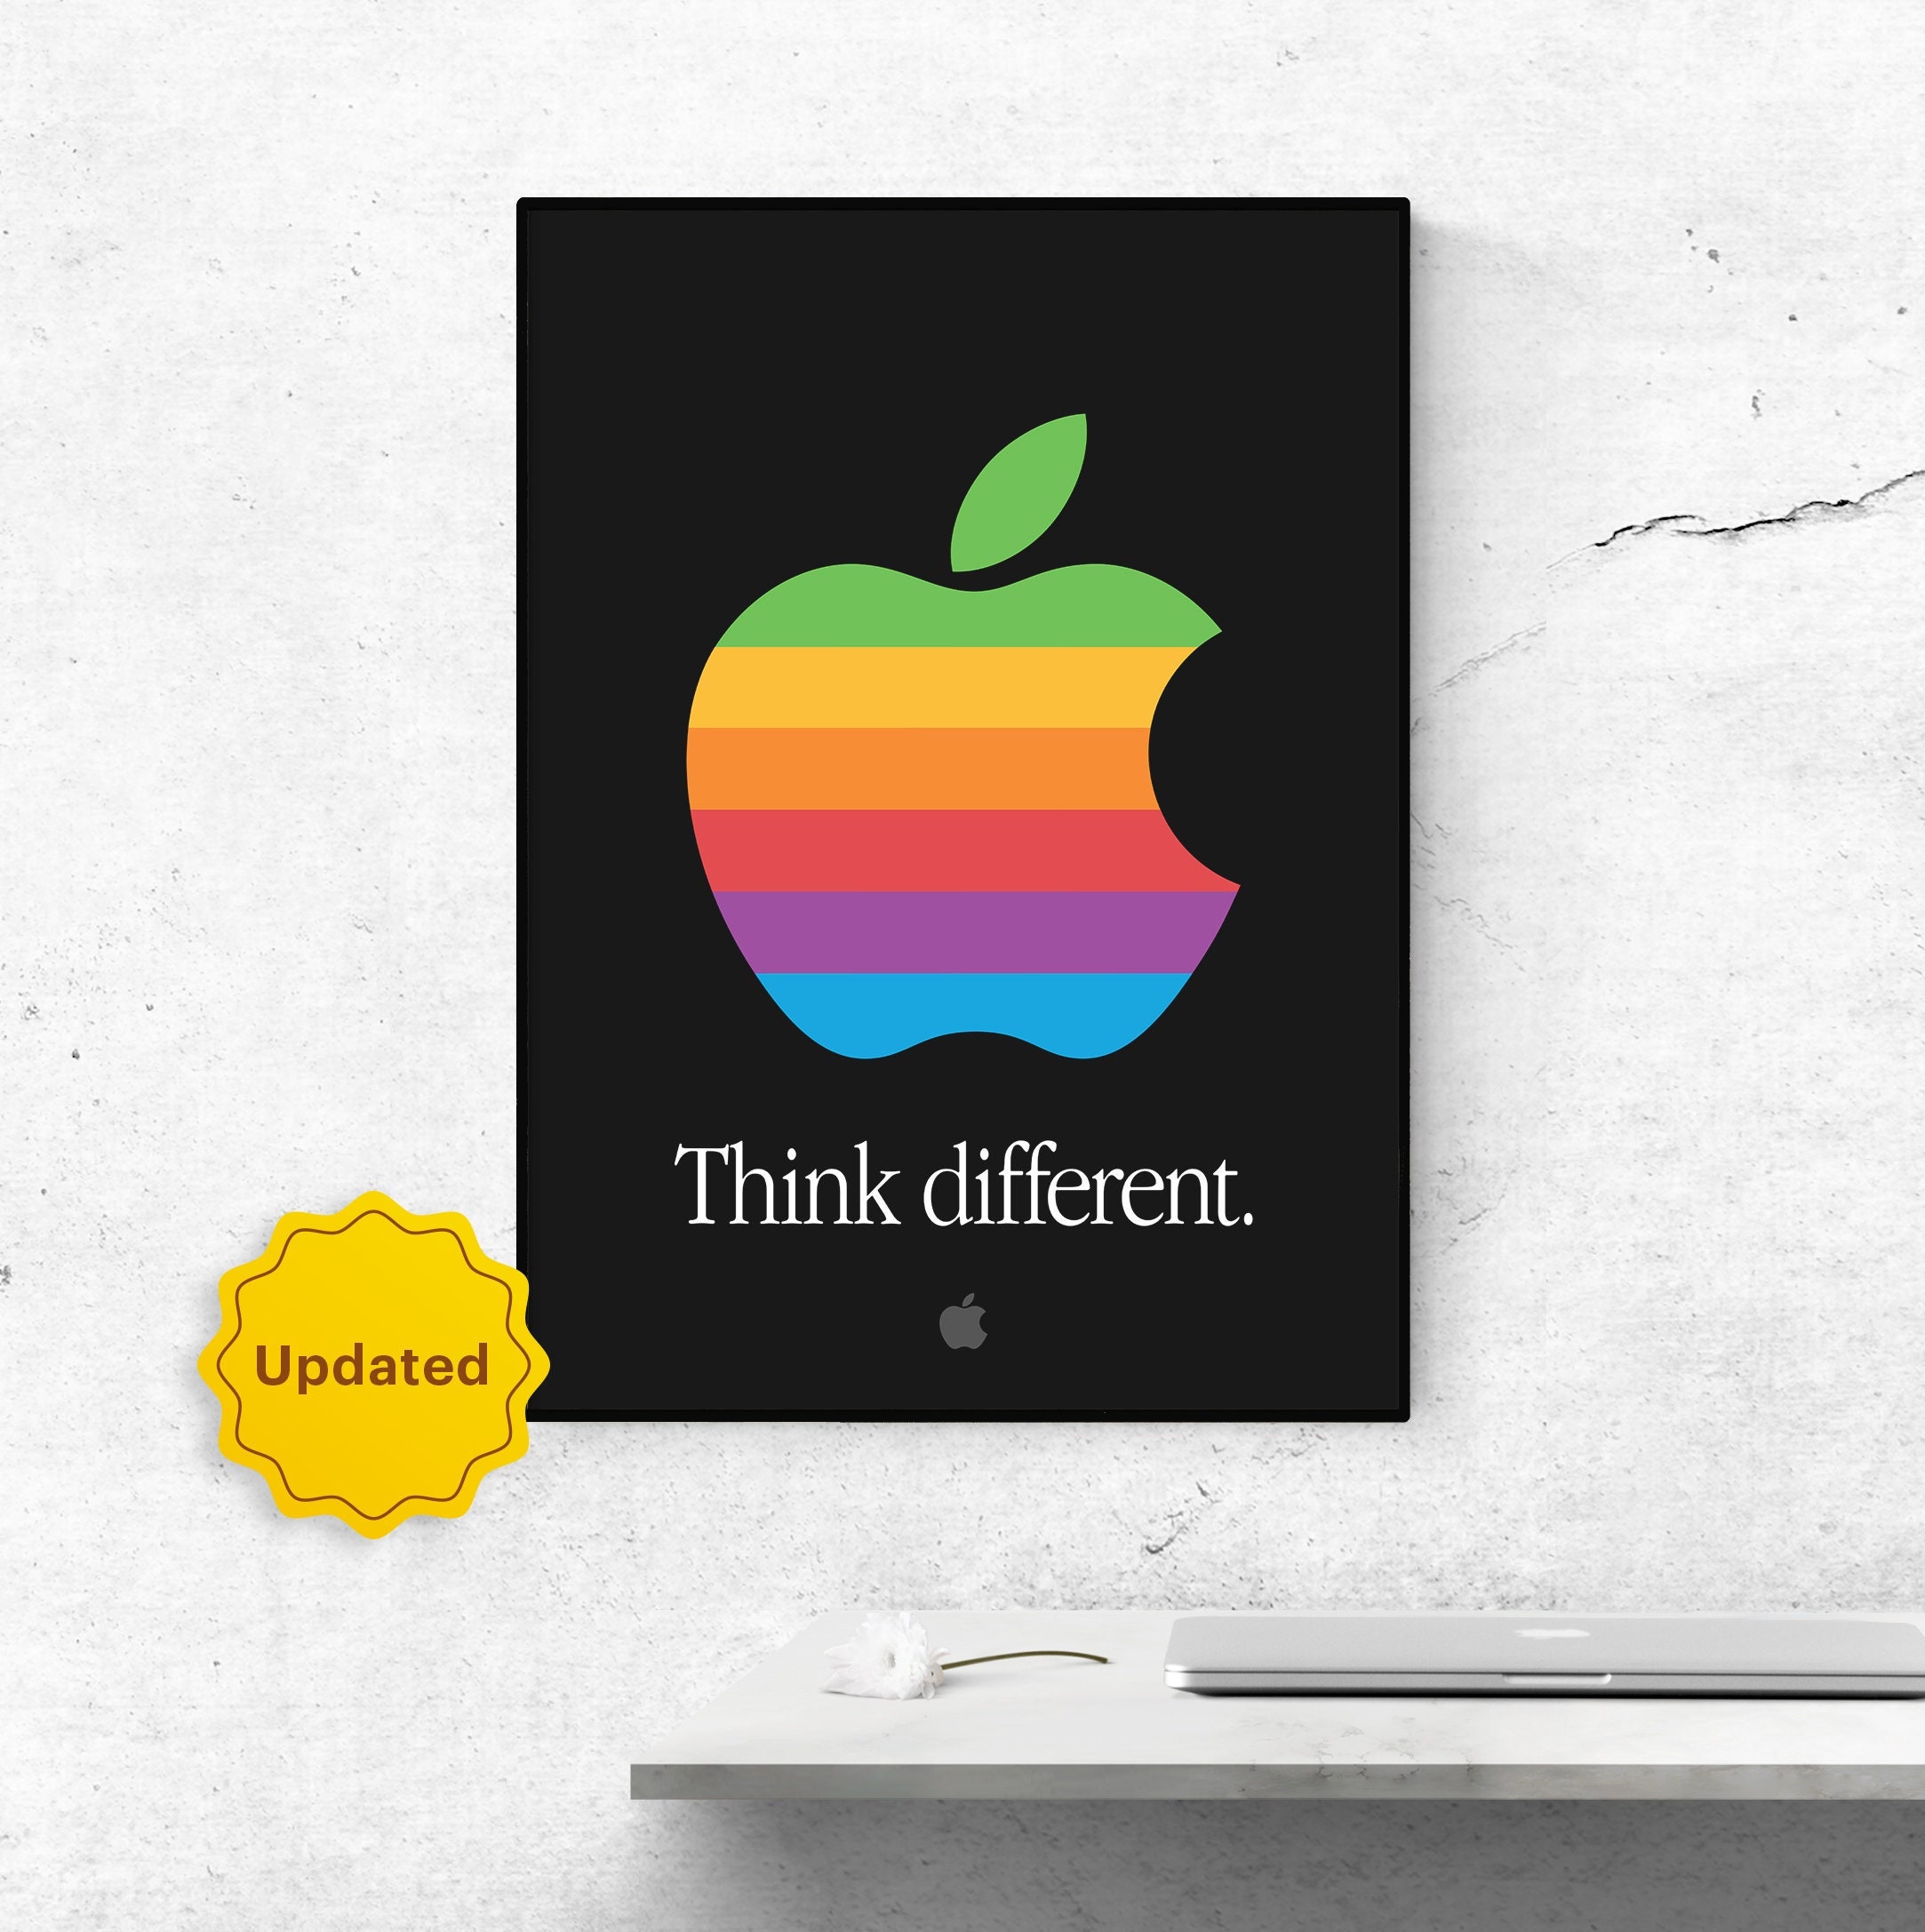 Think You Could Draw The Apple Logo From Memory? Think Again.